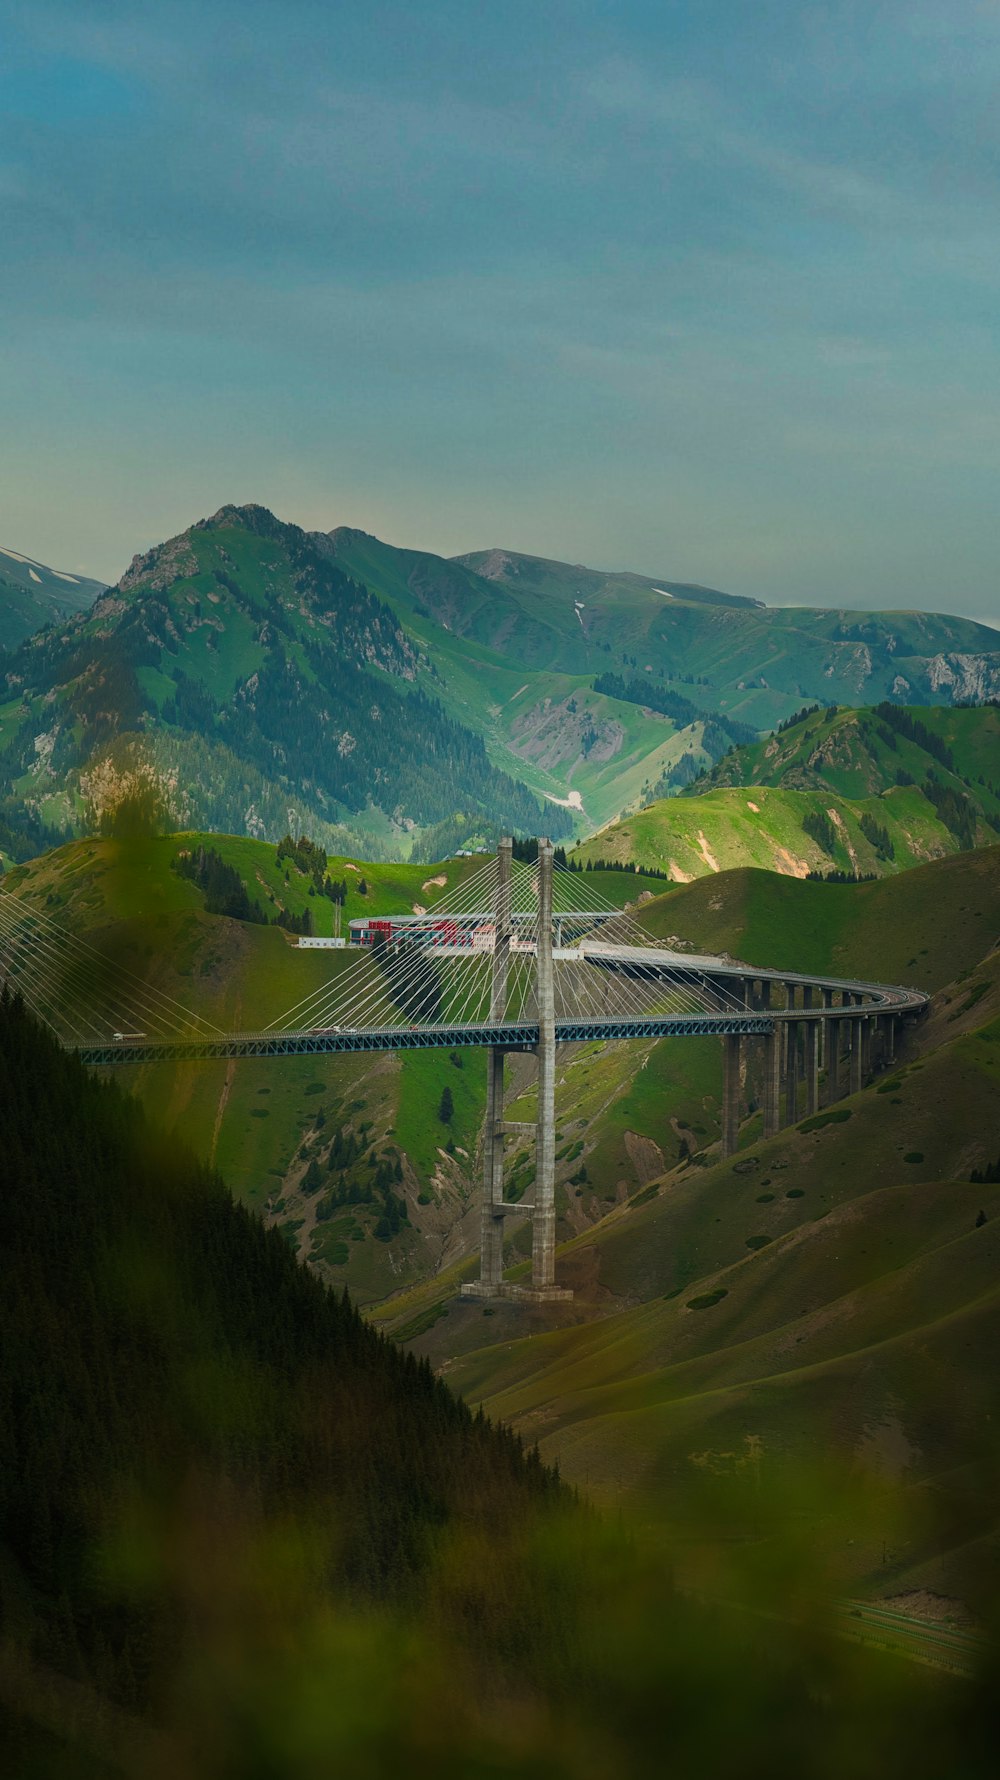 a bridge in the middle of a valley with mountains in the background